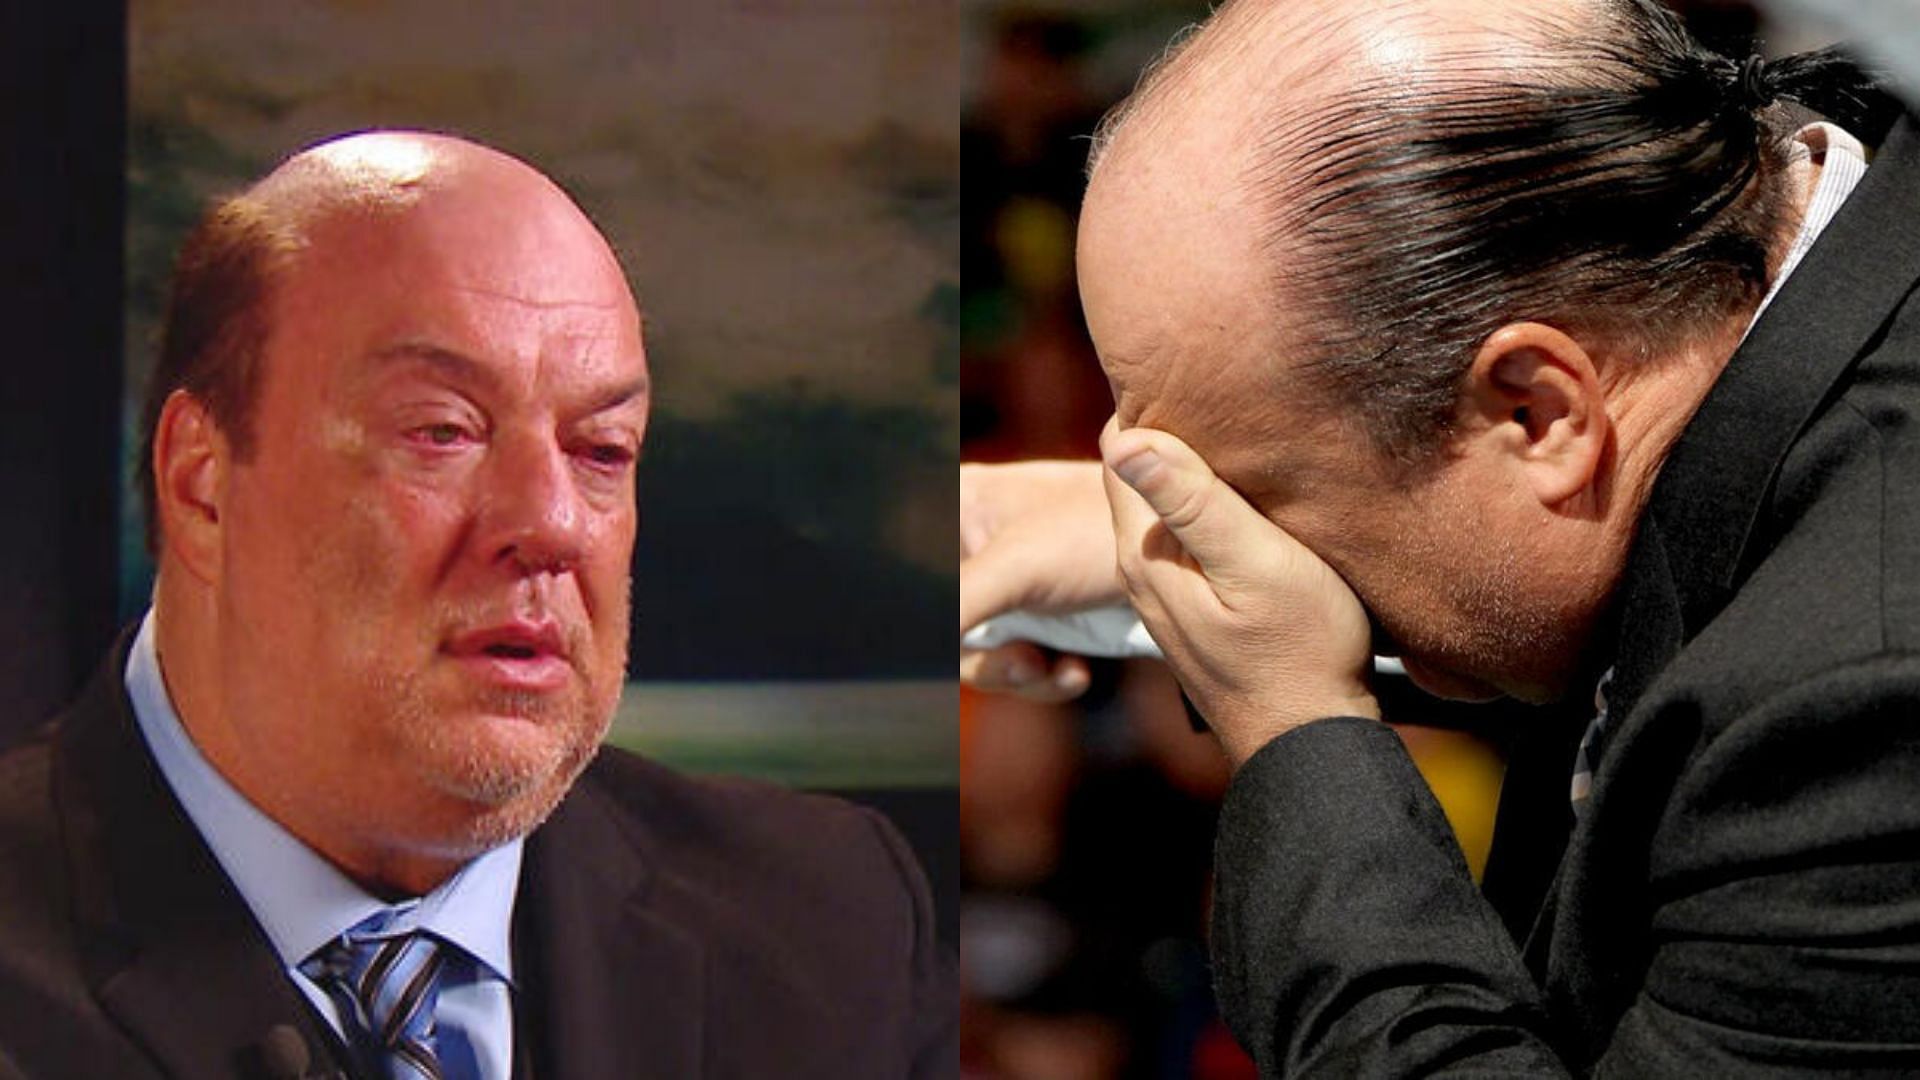 Things have really gone wrong for Paul Heyman